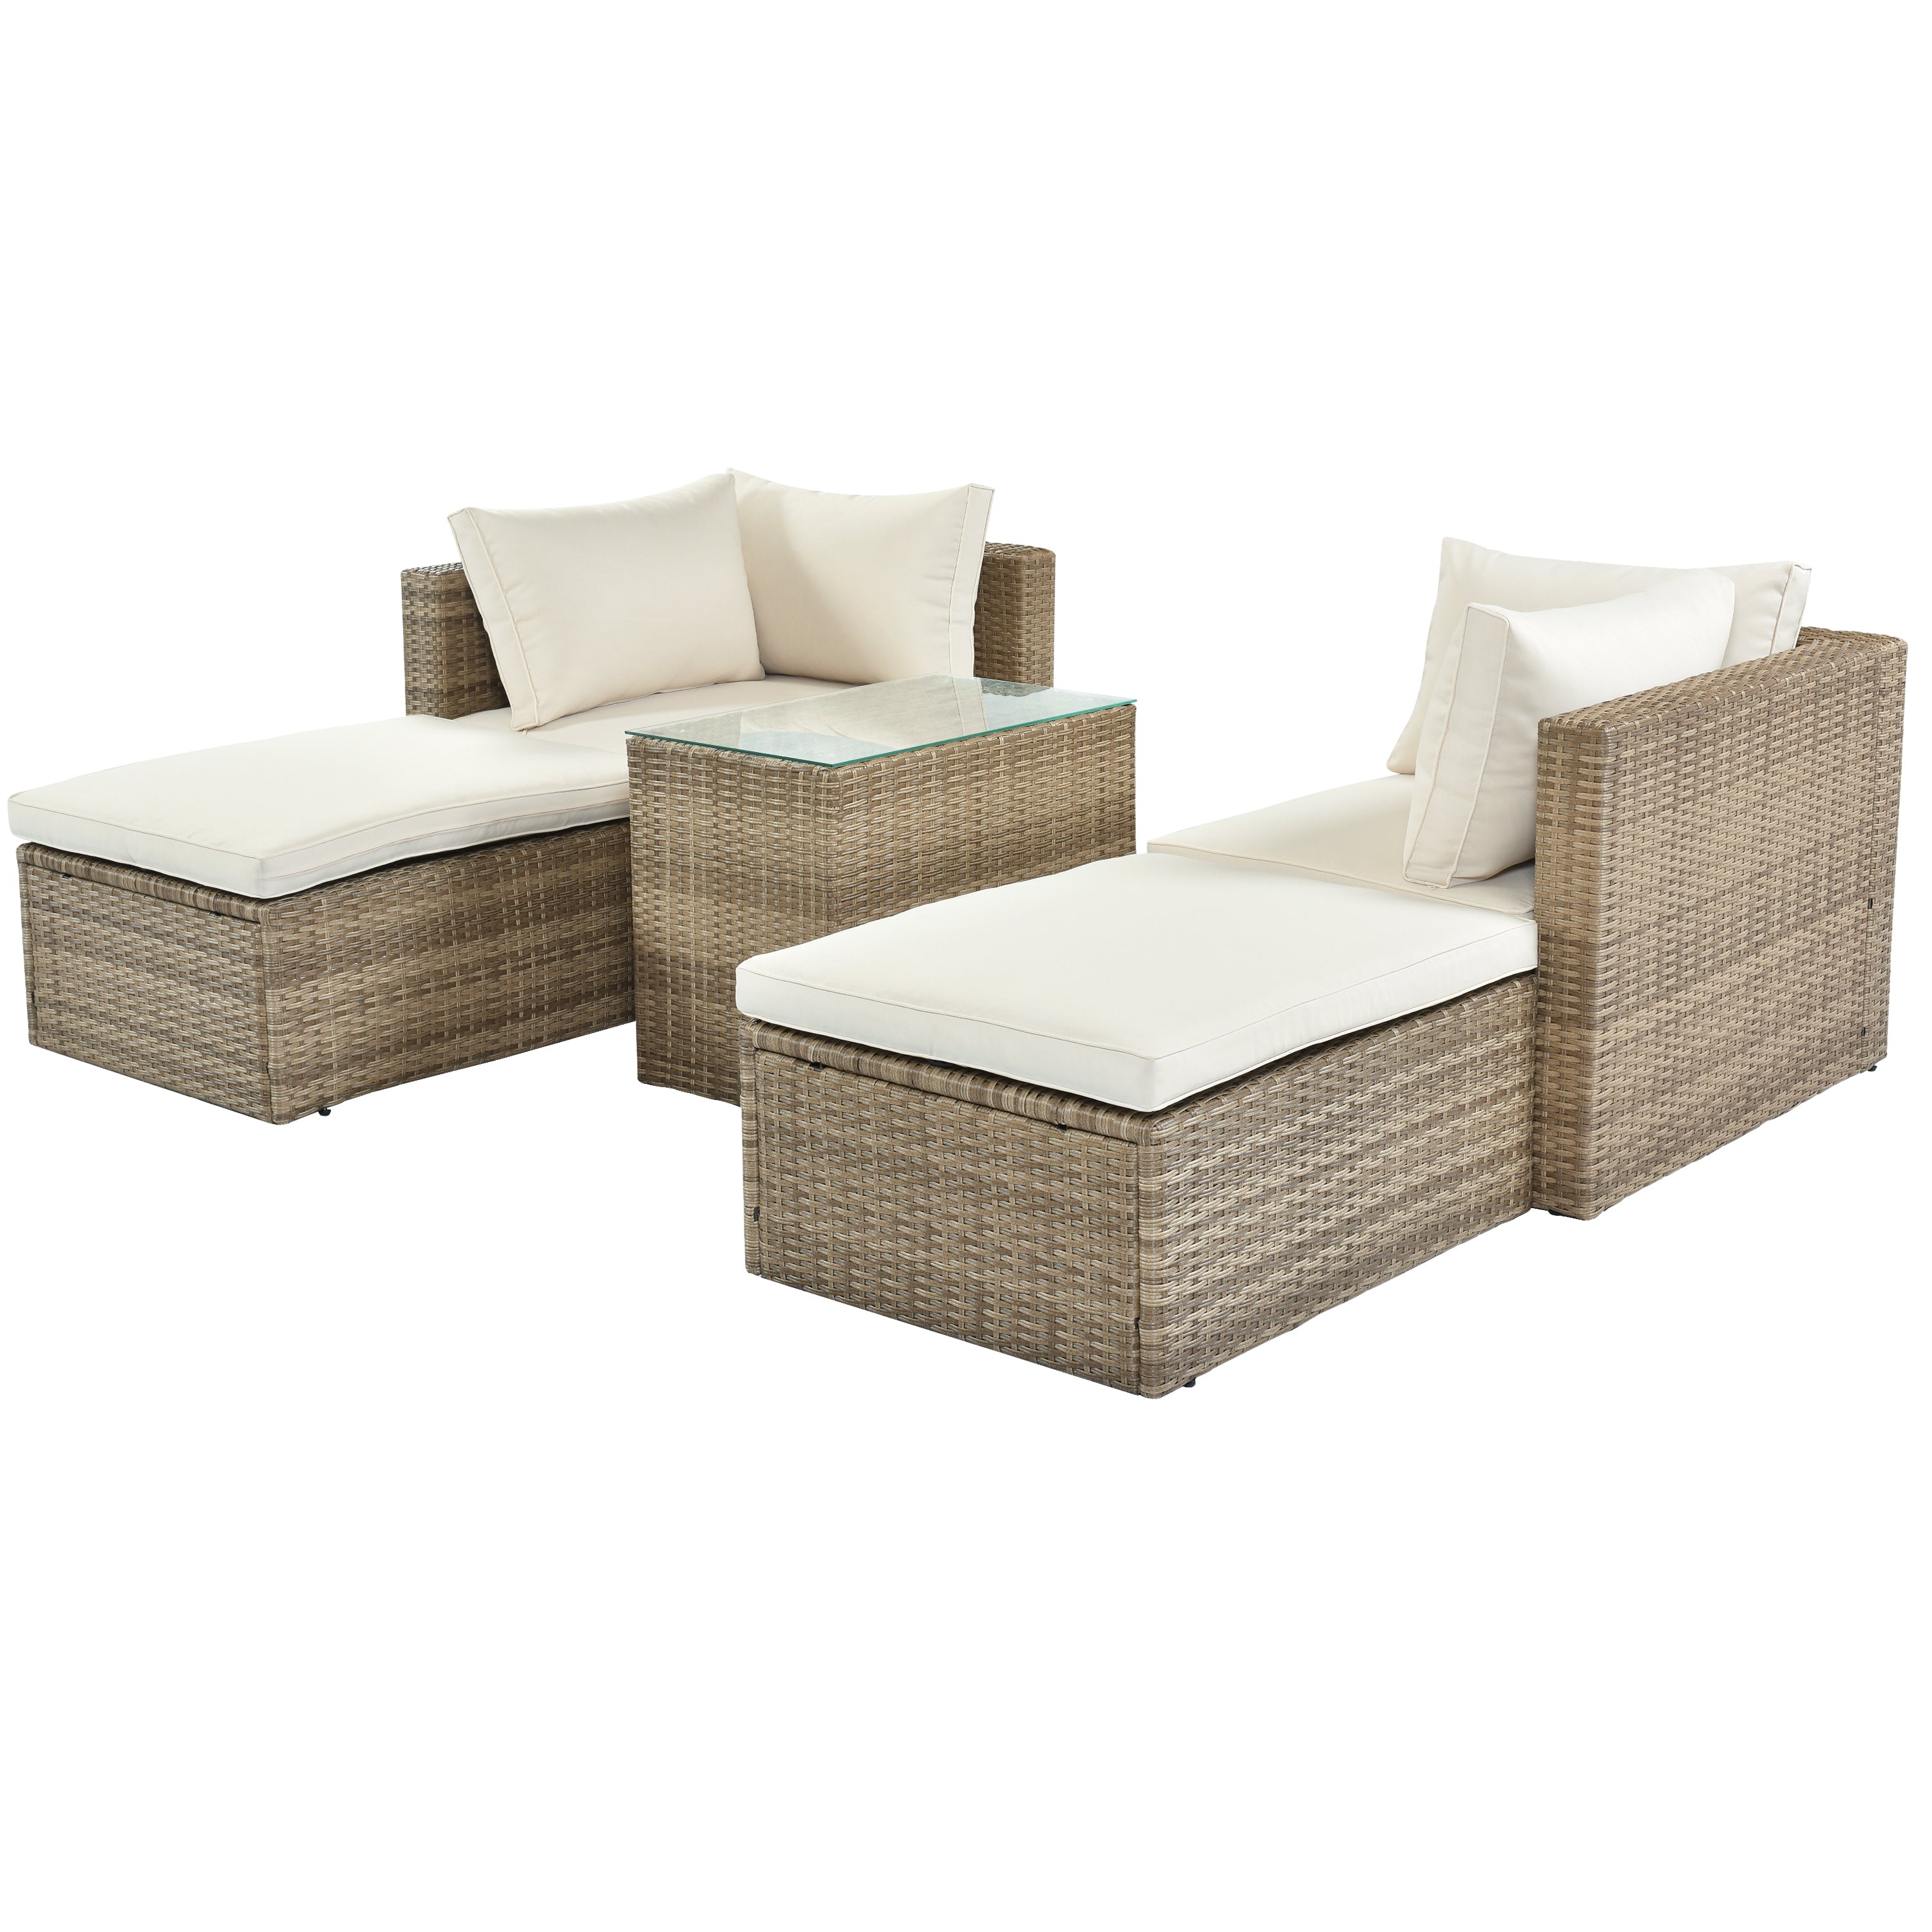 Outdoor Patio Furniture Set, 5-Piece Wicker Rattan Sectional Sofa Set - Brown and Beige